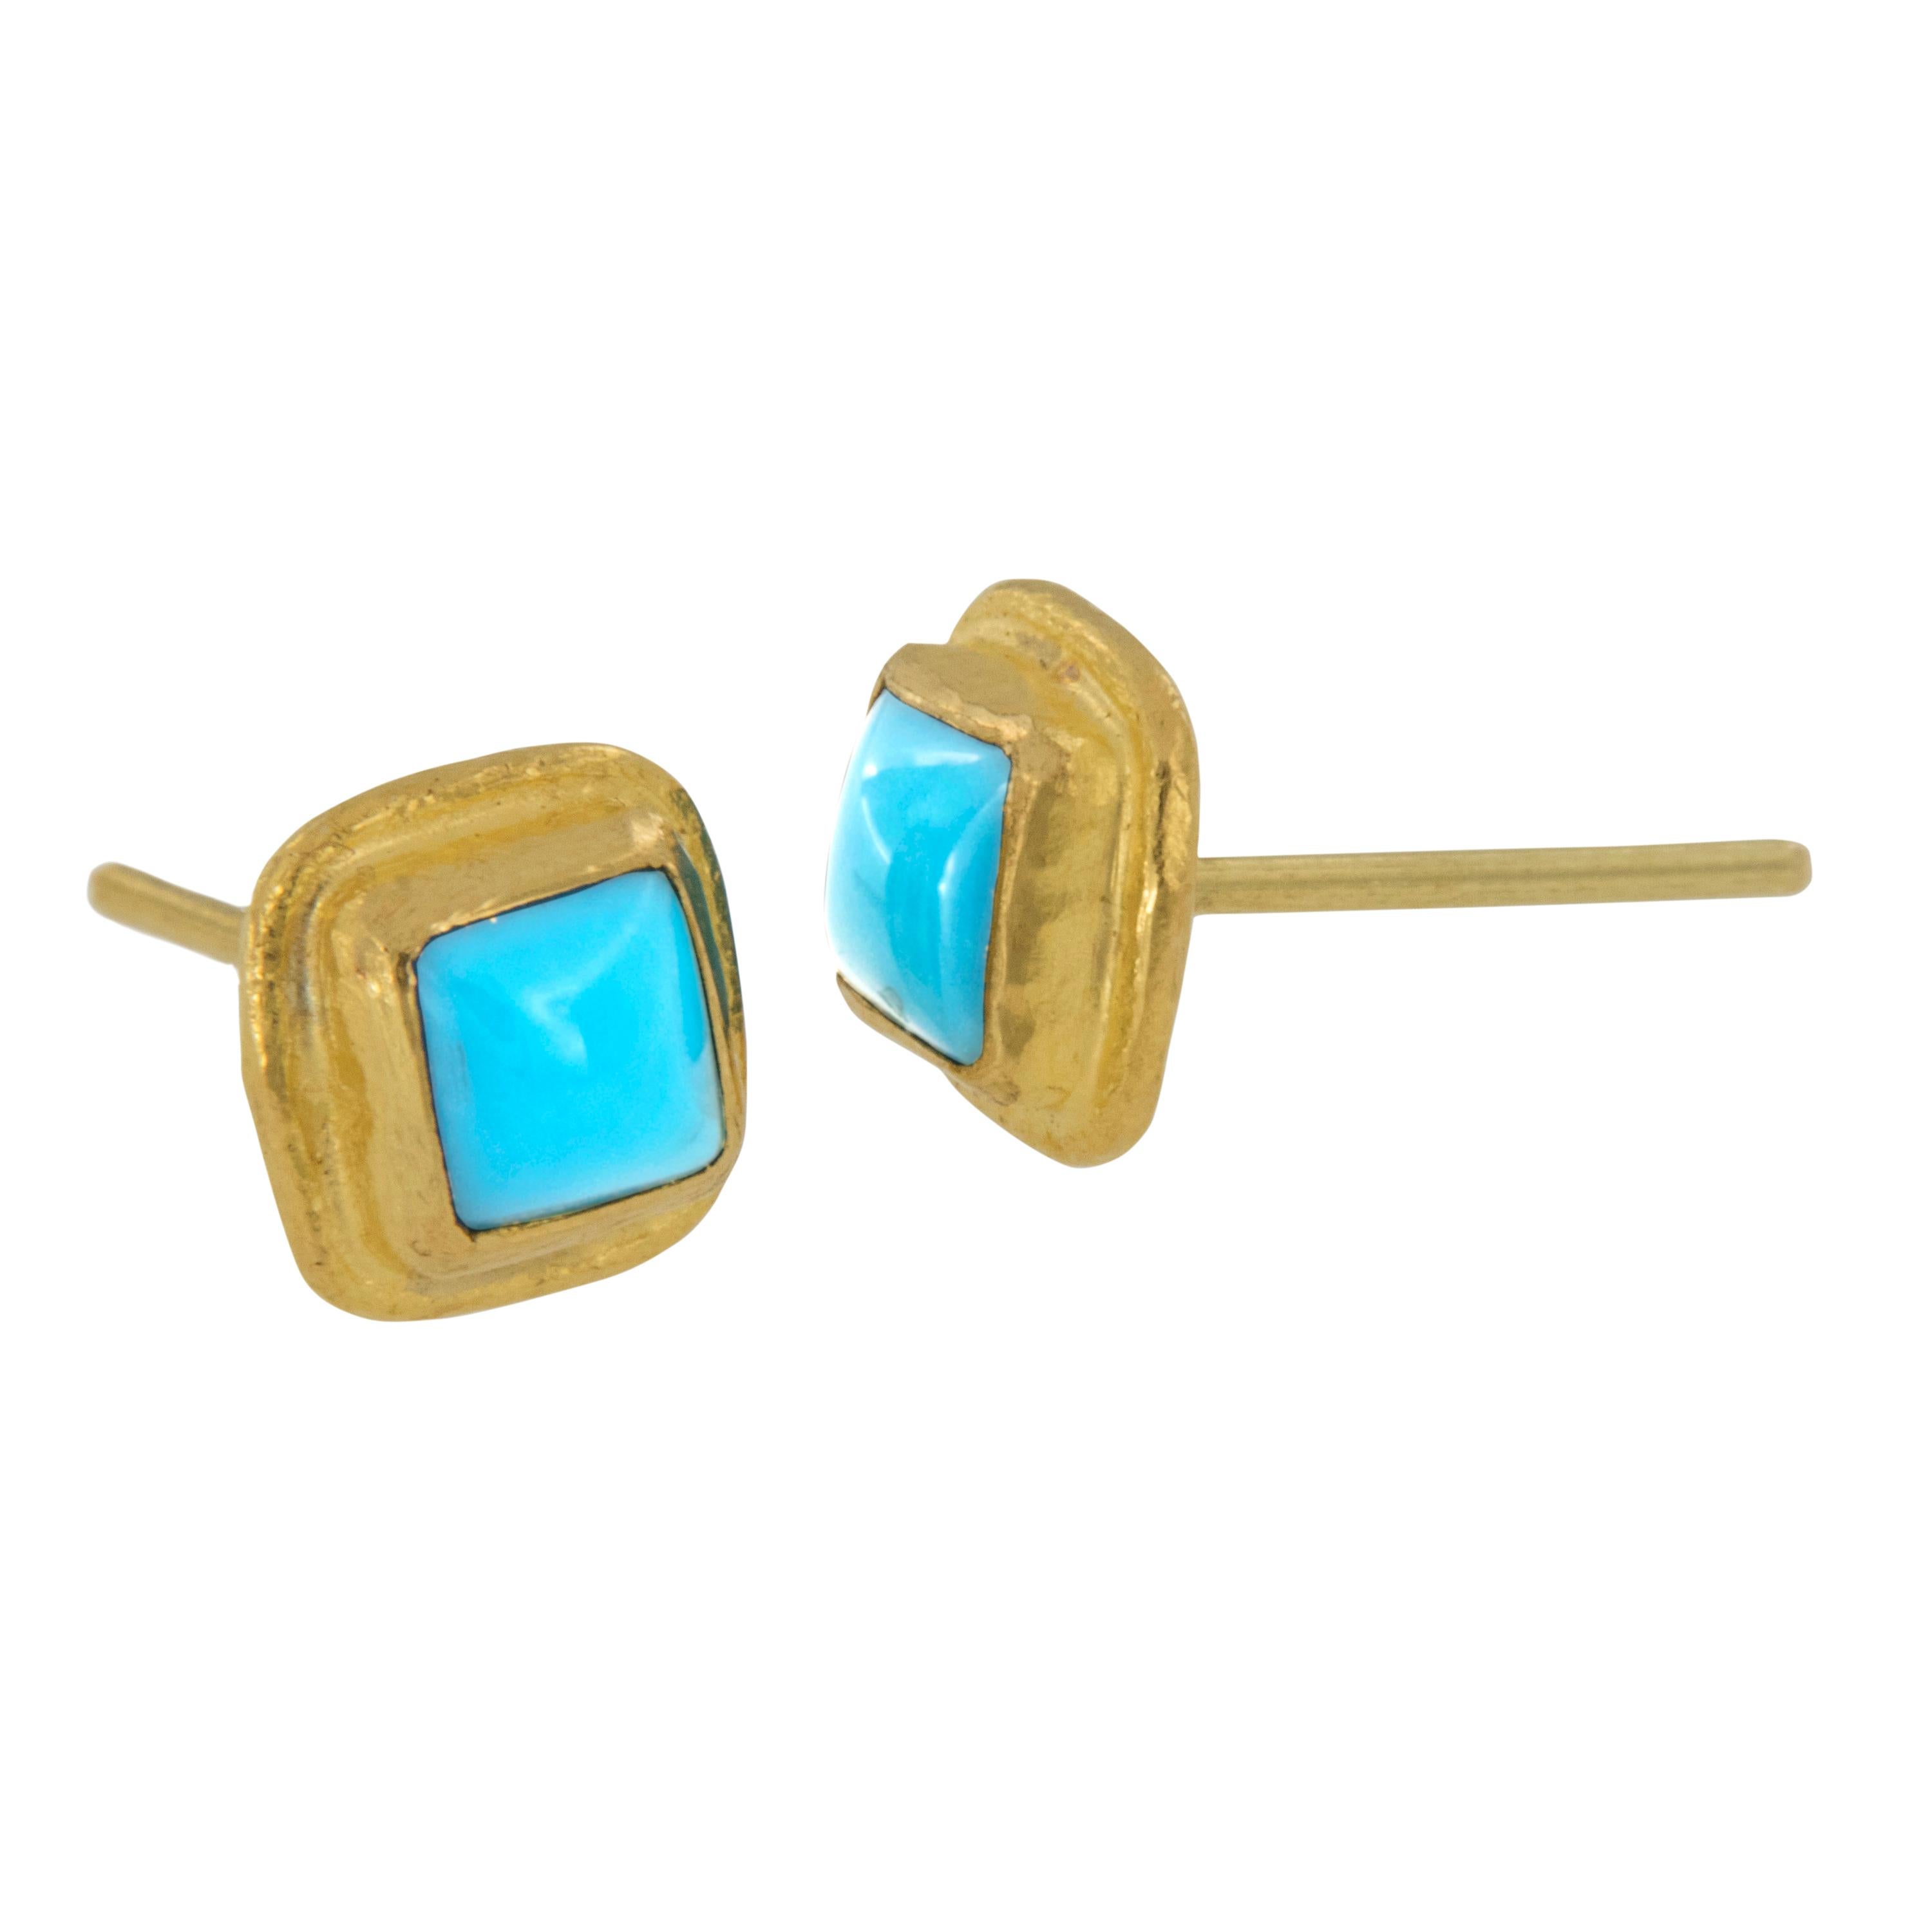 Nothing is more luxurious than pure 24 karat gold! It has such a warm, sunshine reminiscent color. Own these adorable turquoise earrings & bring some of that beautiful sunshine to your life! These turquoise pieces (1.17 Cttw) have the rich color all